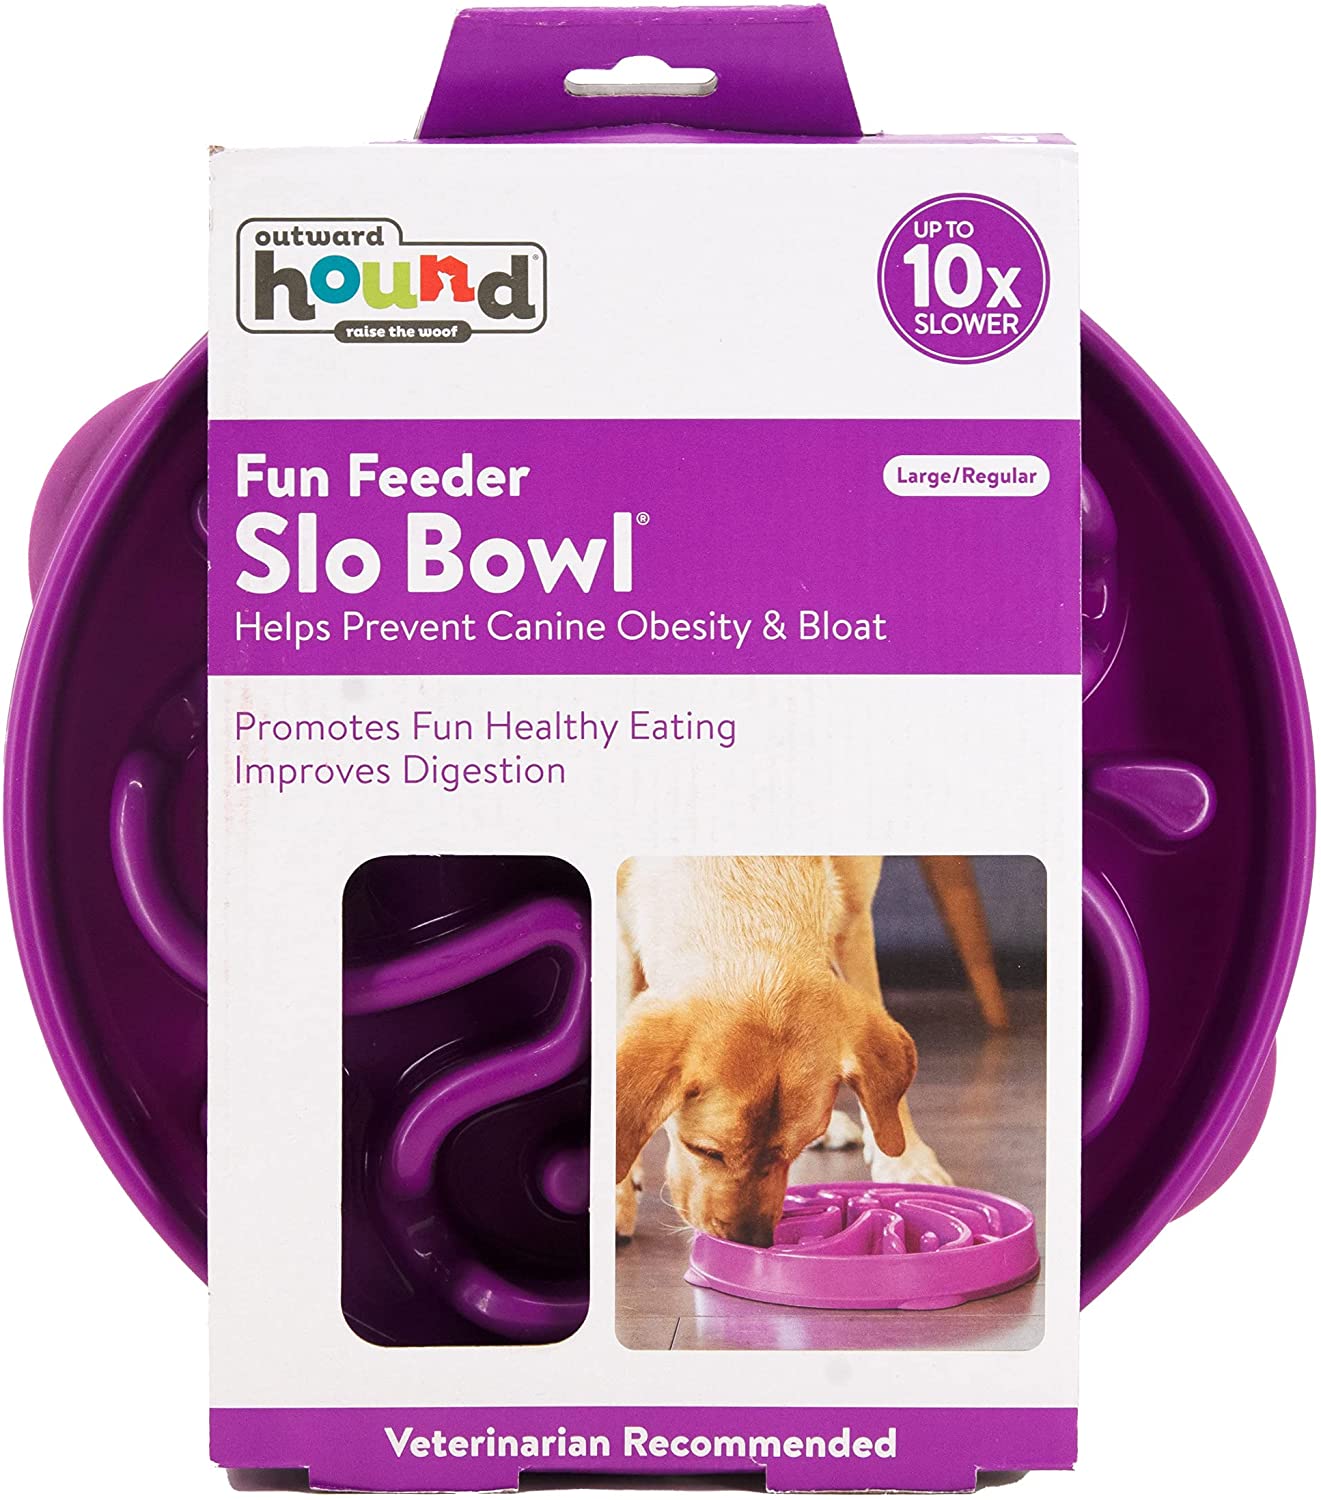 Fun feeder slo-bowls won't slip or slide & are made with food-safe materials that are bpa, pvc & phthalate free